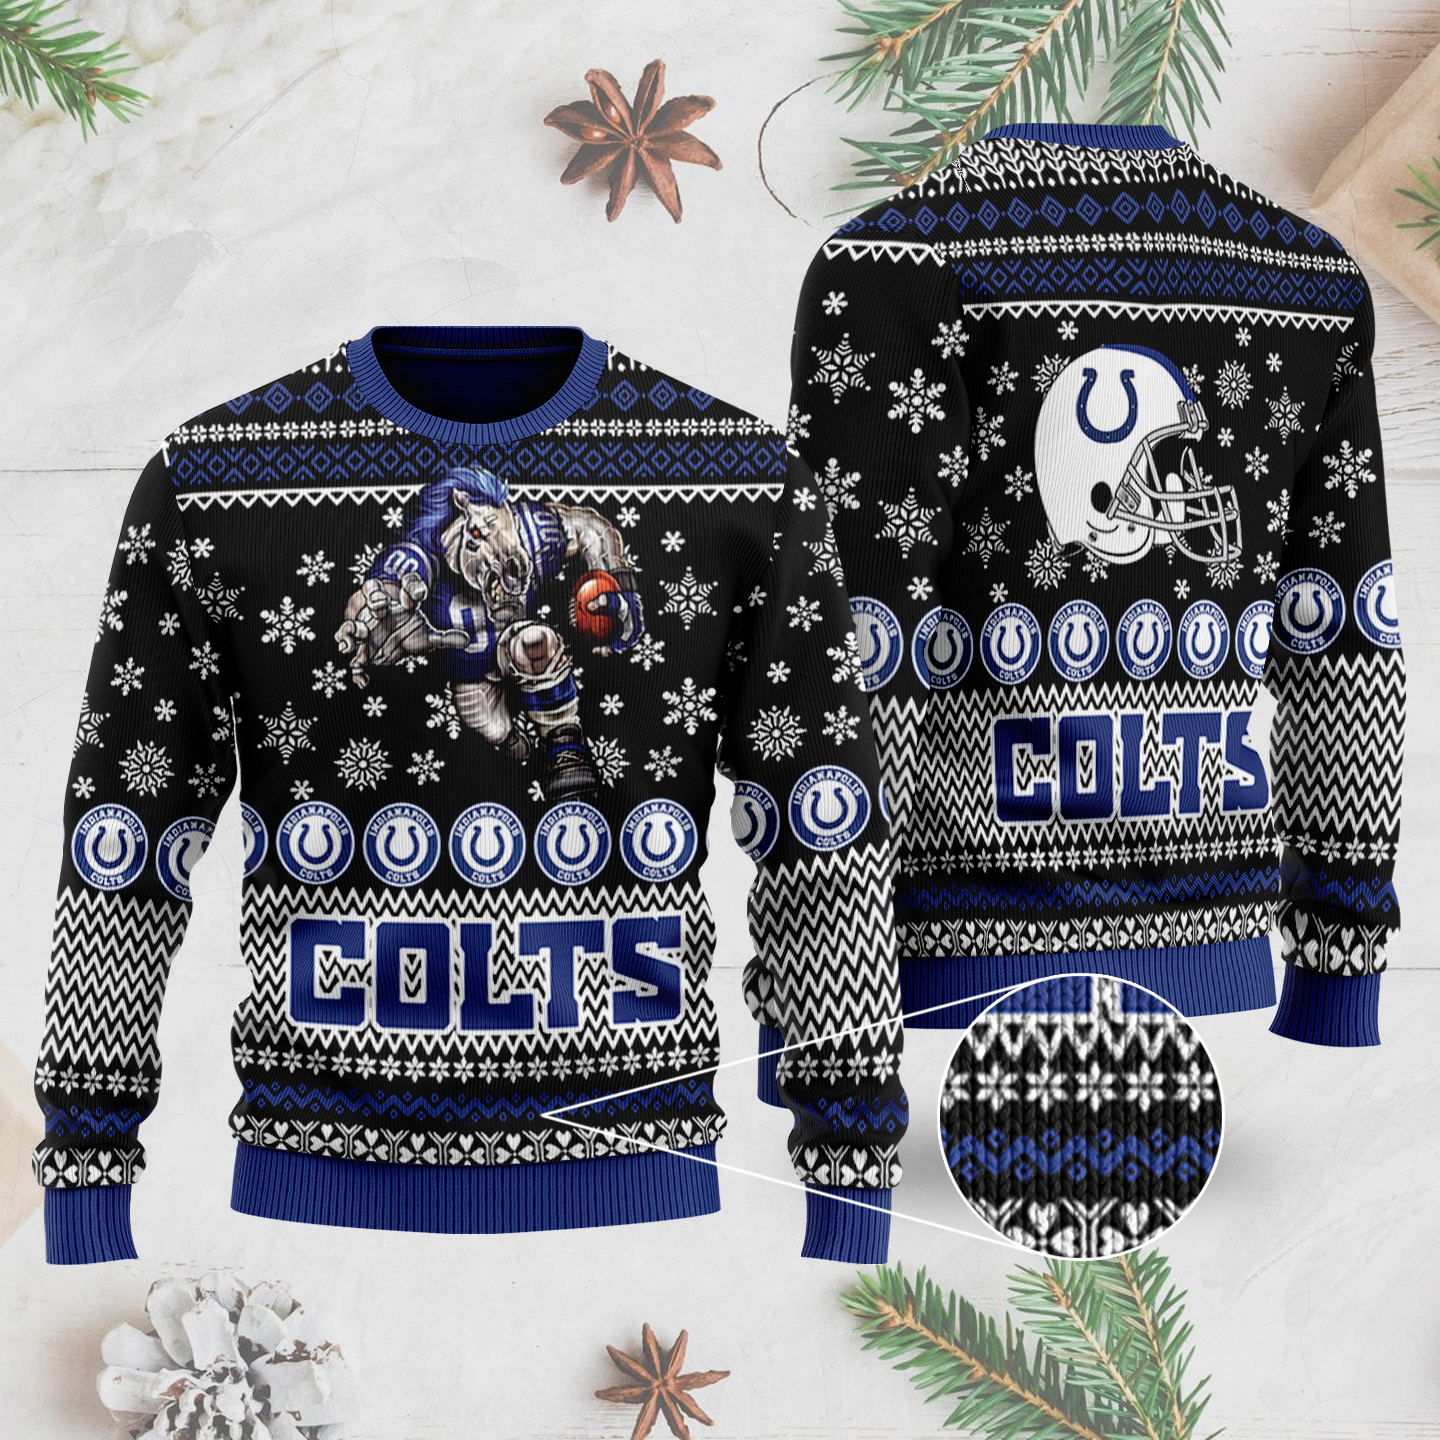 indianapolis colts ugly christmas sweater